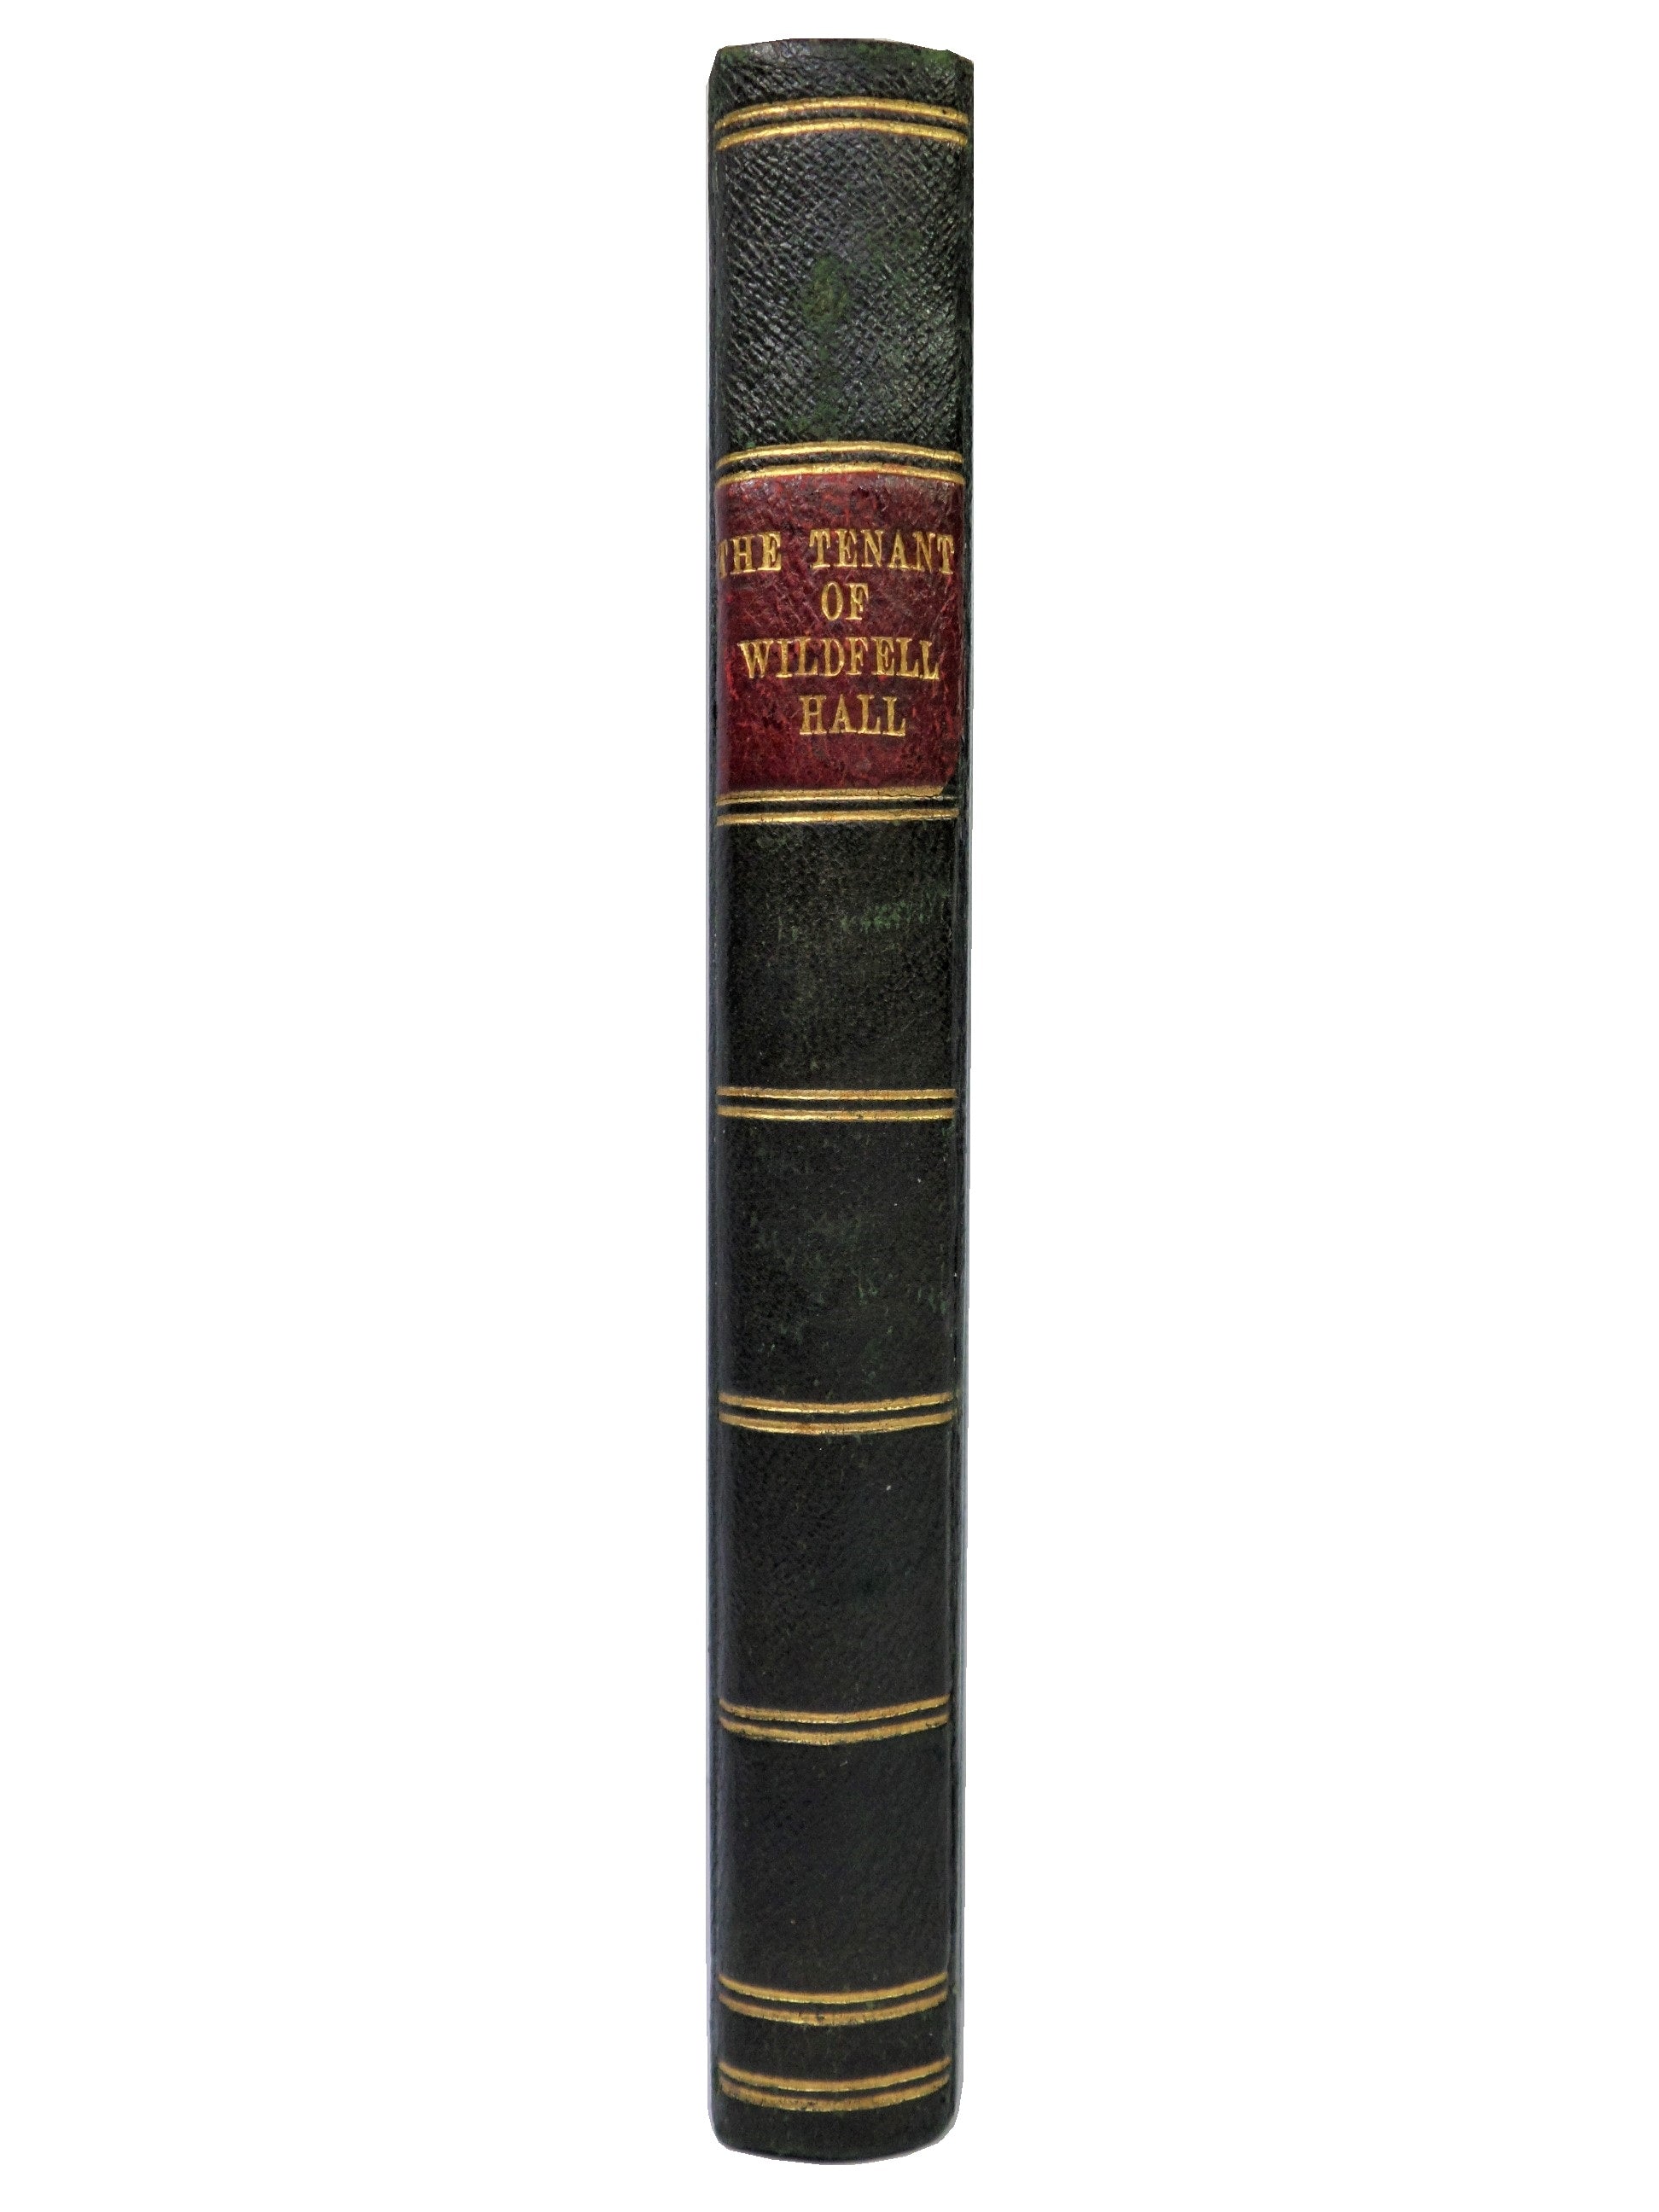 THE TENANT OF WILDFELL HALL BY ANNE BRONTE [ACTON BELL] 1854 THIRD